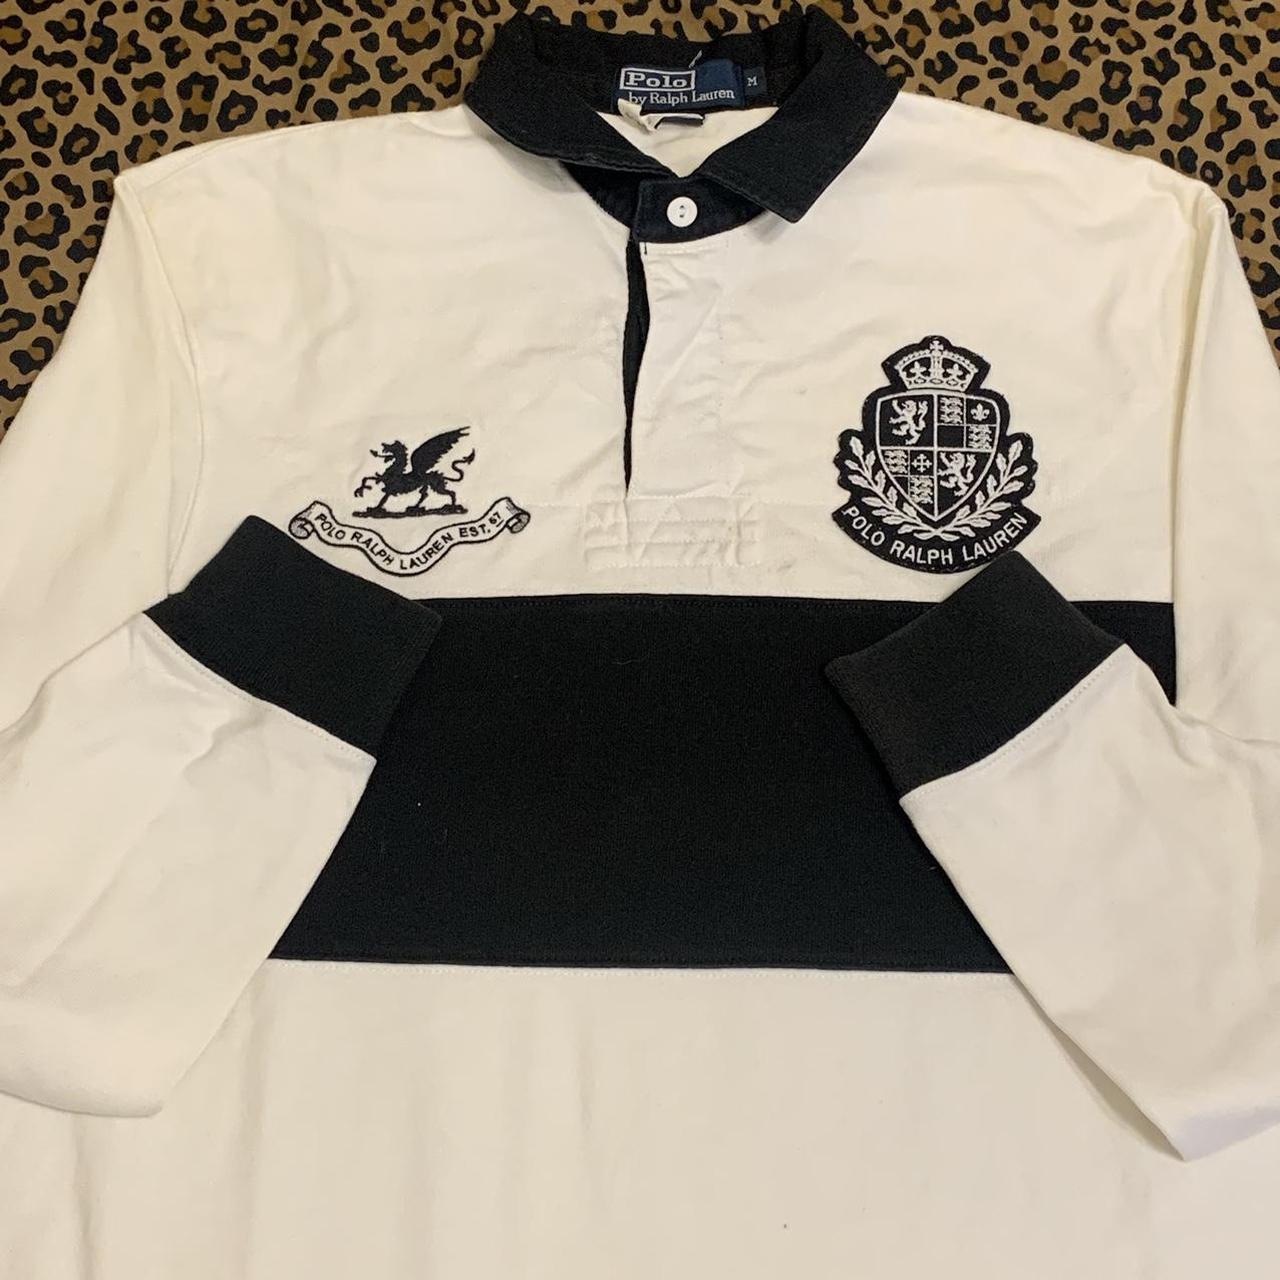 Vintage polo rugby shirt tagged m but larger... - Depop